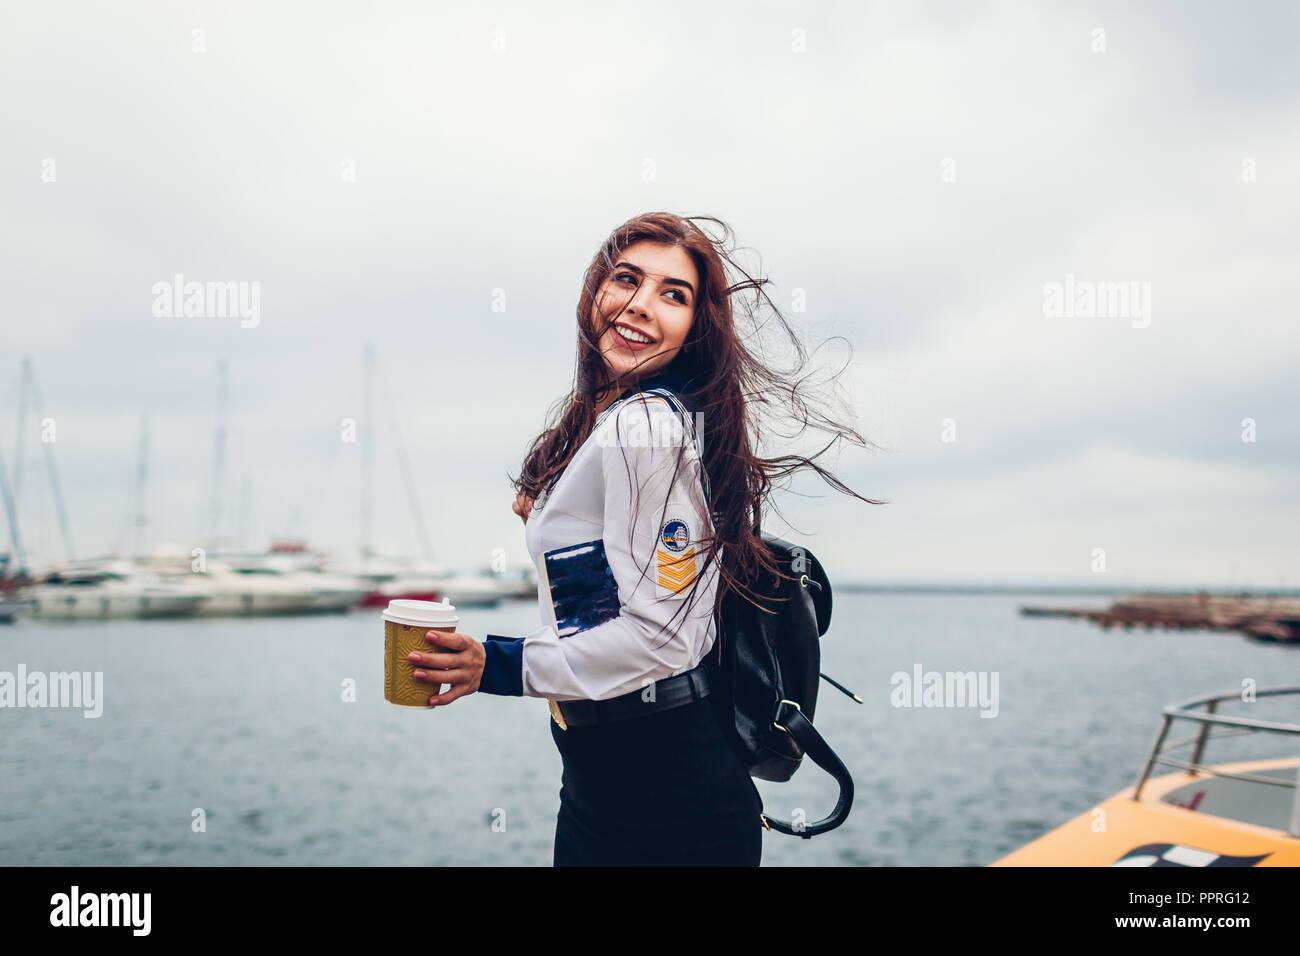 College woman student of Marine academy drinking coffee by sea wearing uniform. Girl walking in seaport of Odesa on pier Stock Photo